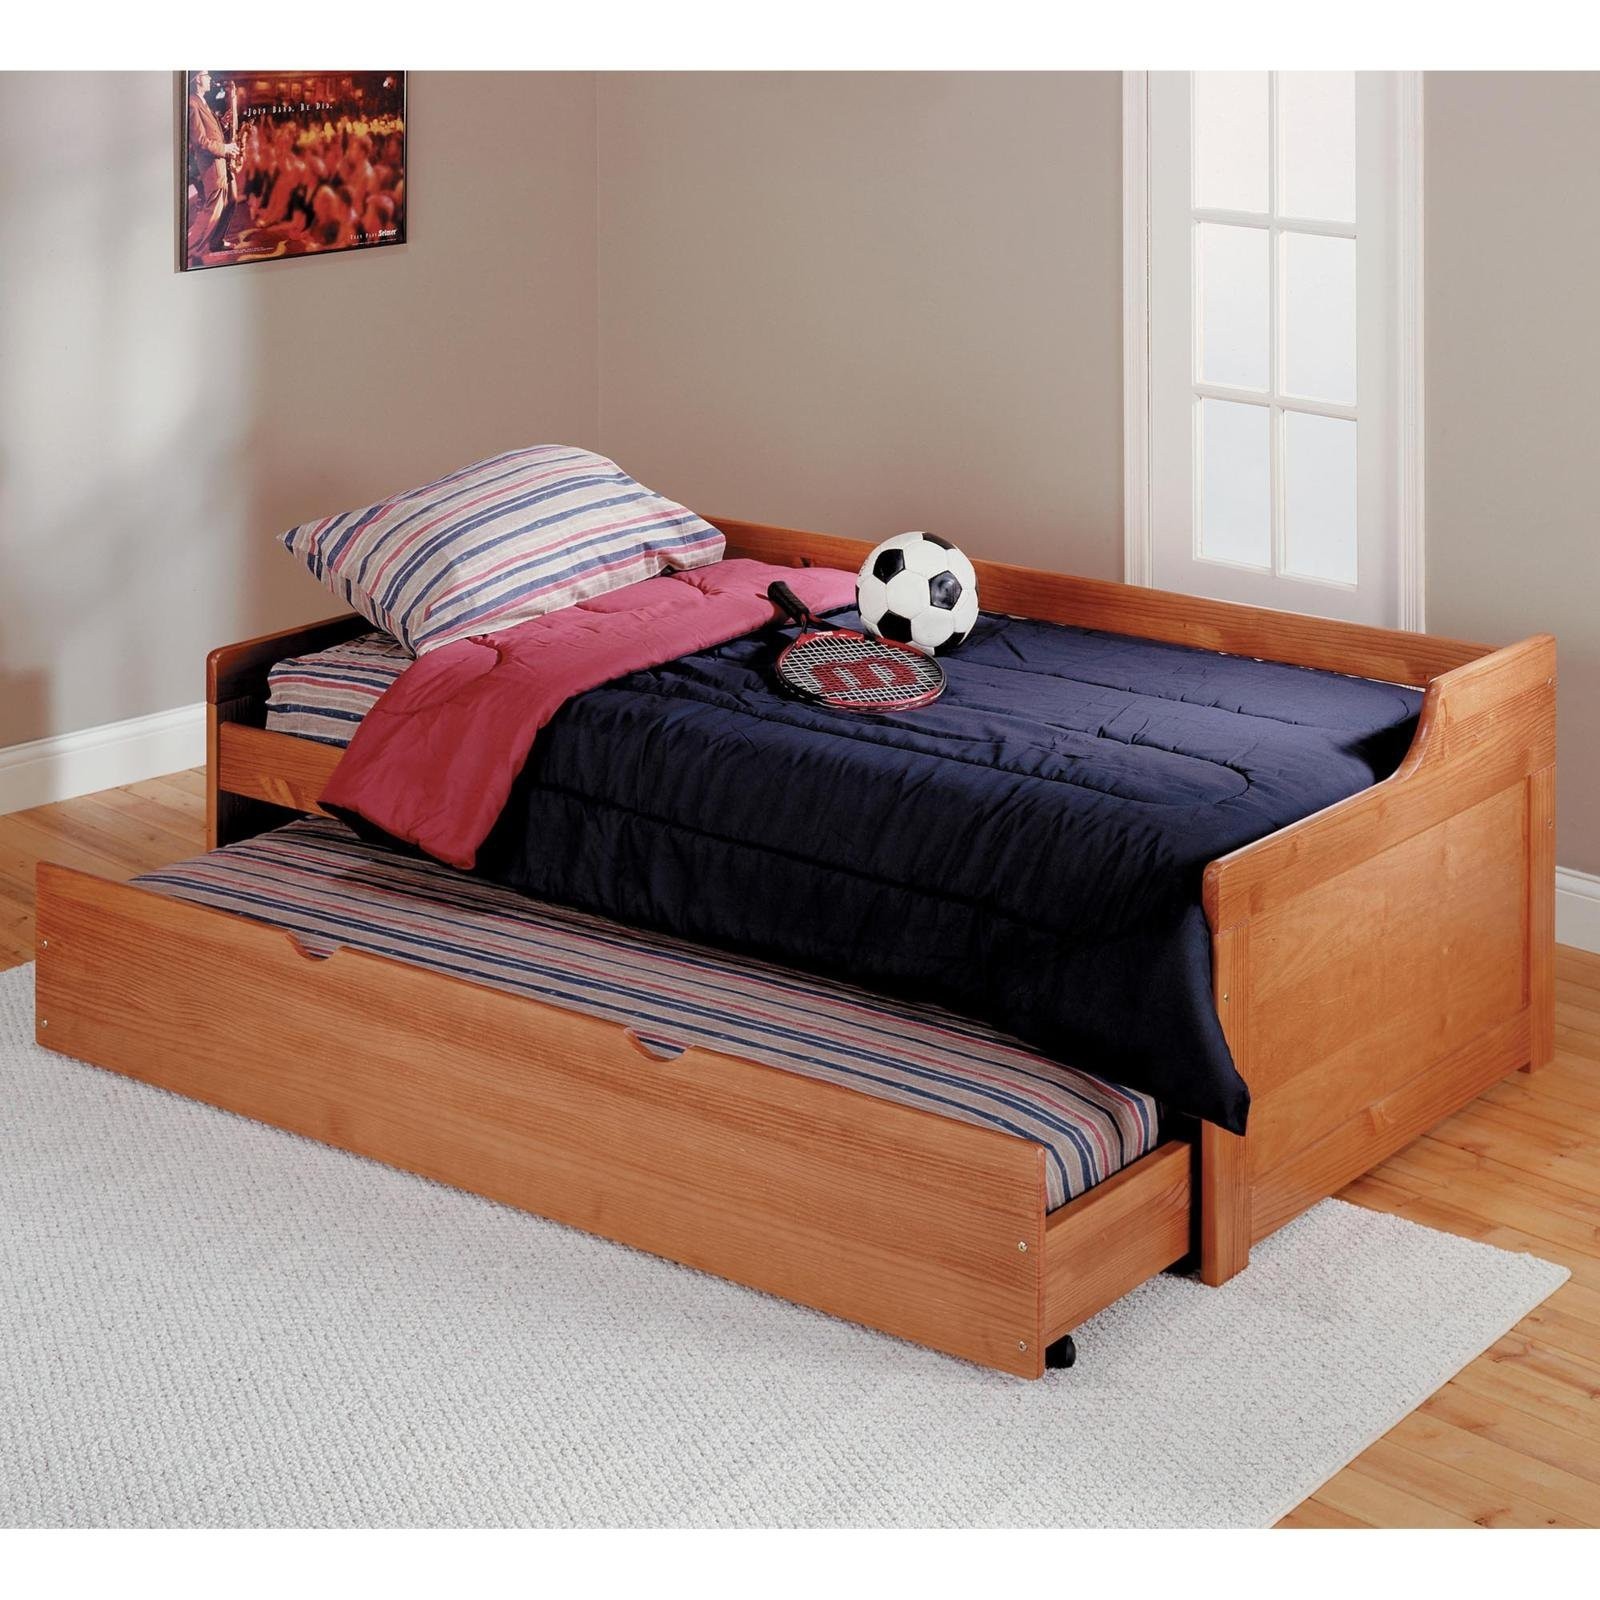 Trundle beds for children homesfeed 1